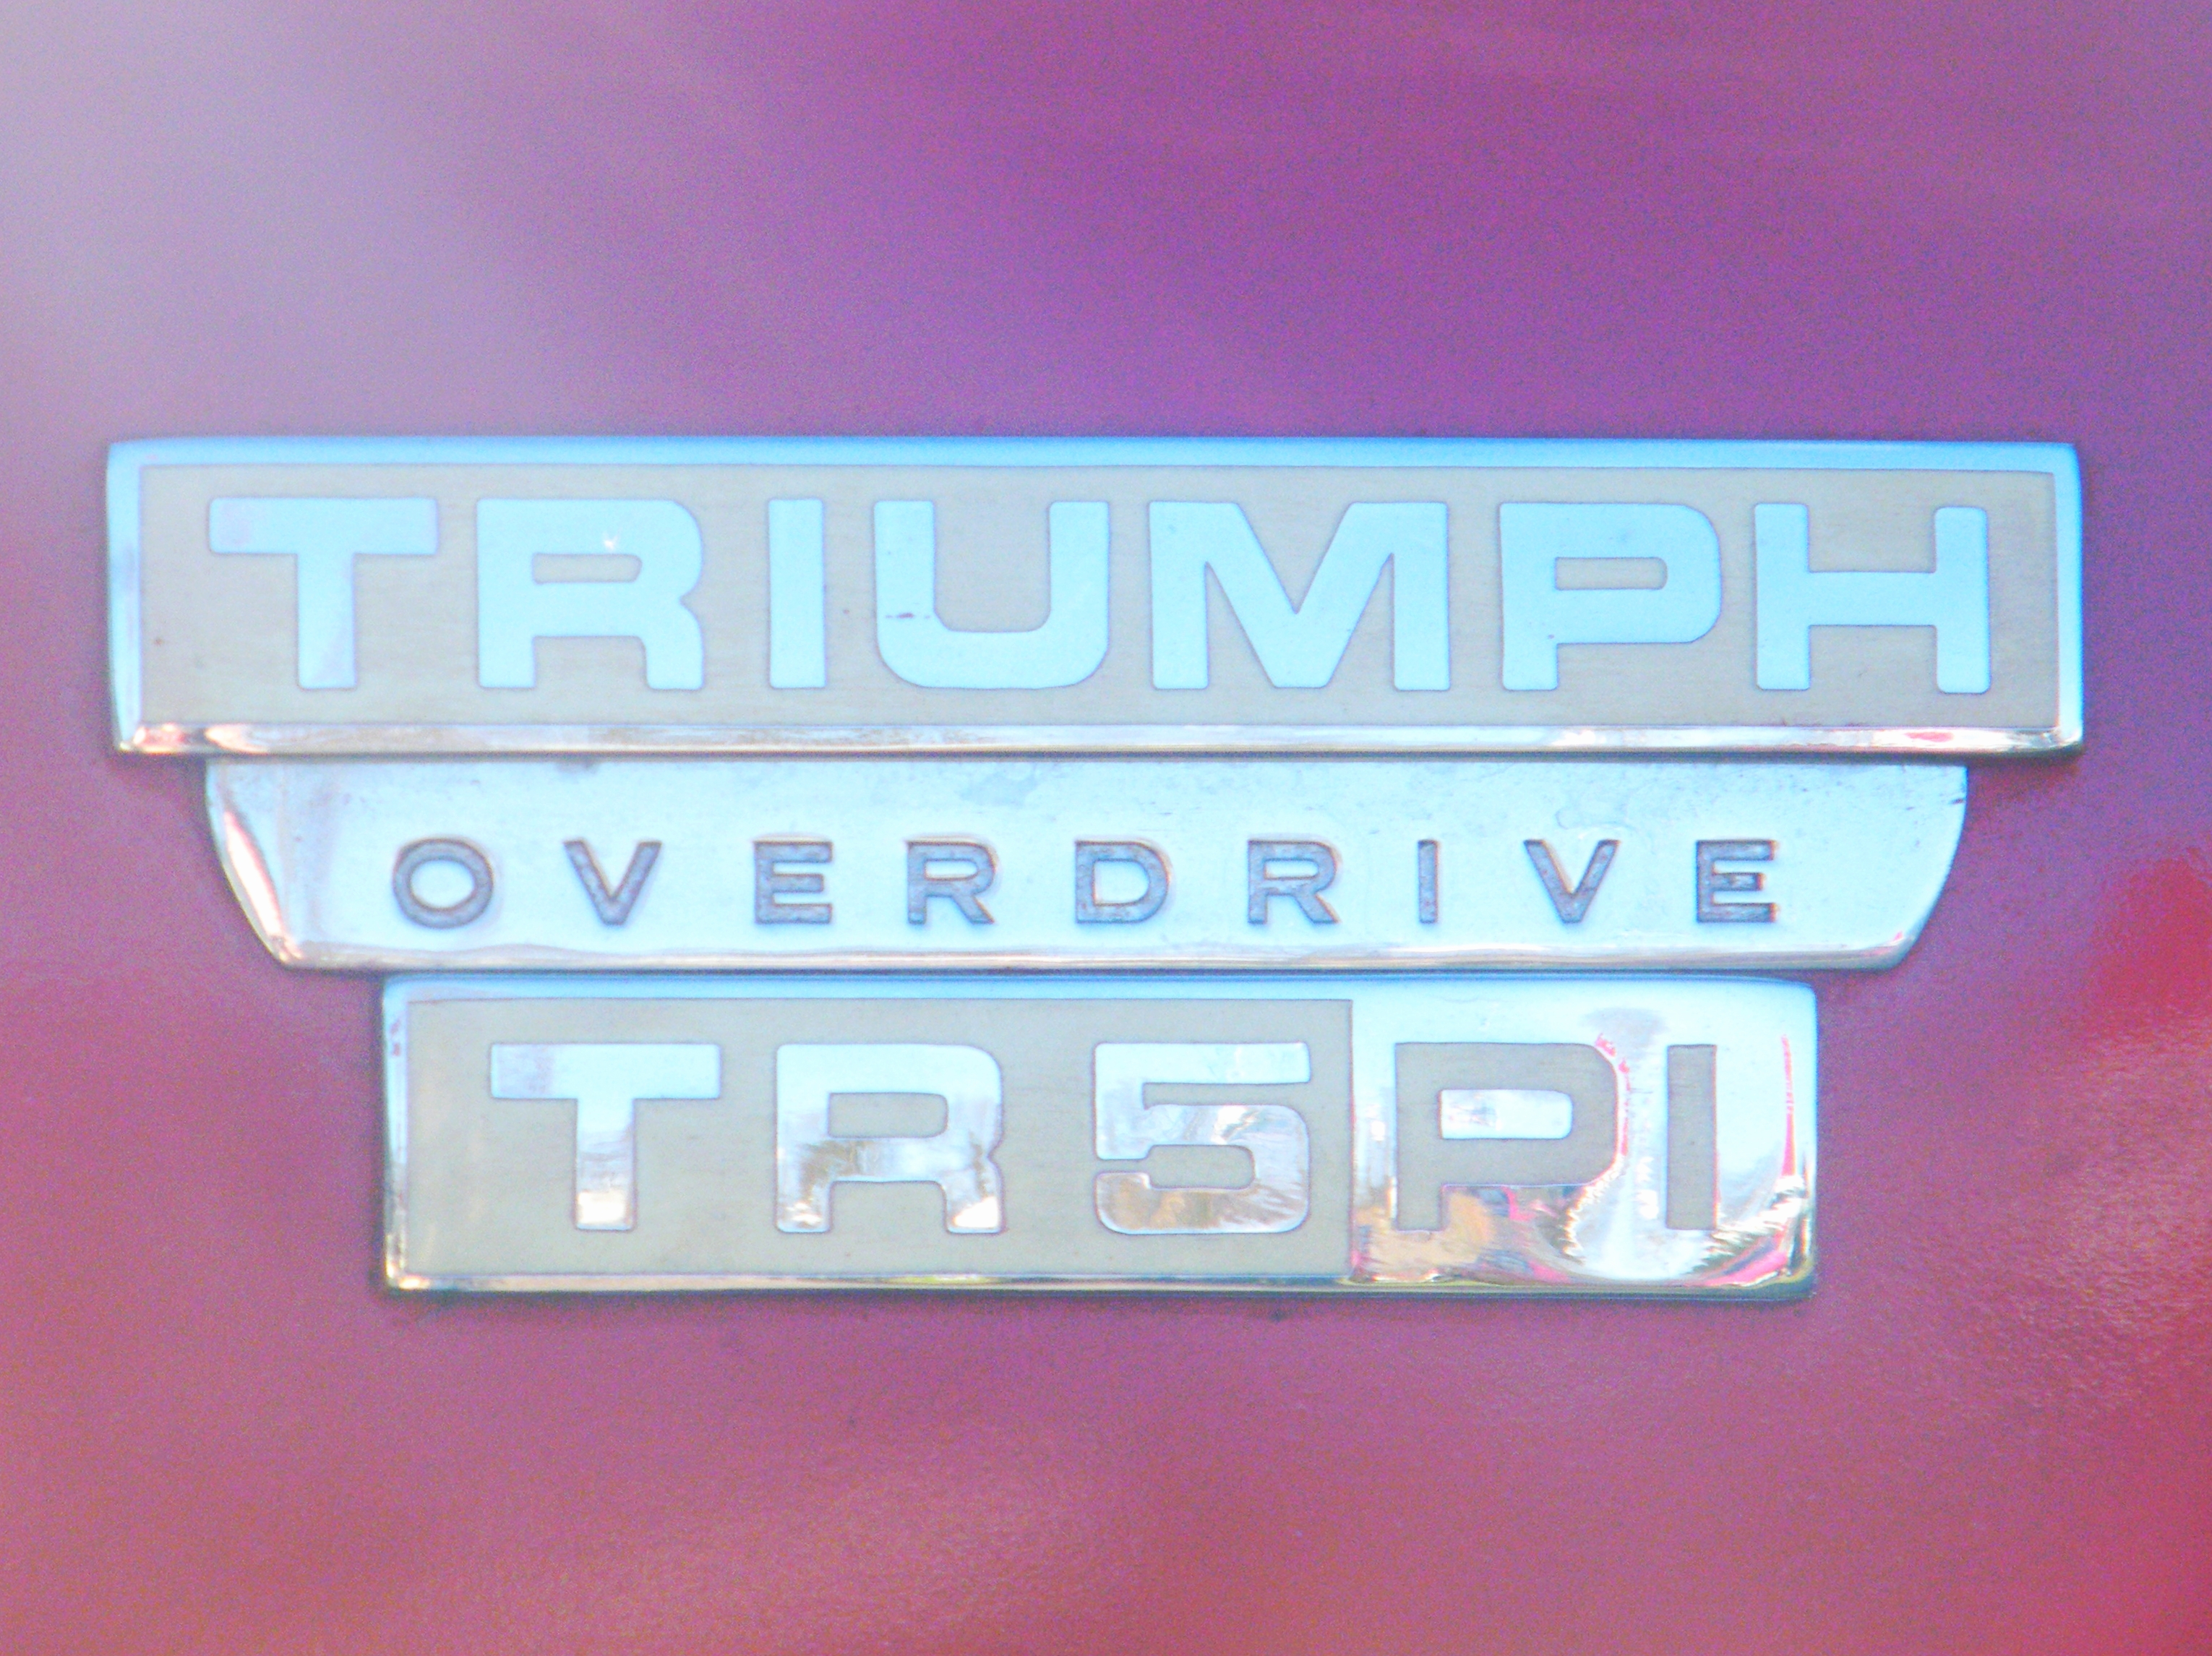 Brooklands New Year's Day 2013 - 1967 Triumph TR5PI | Flickr ...